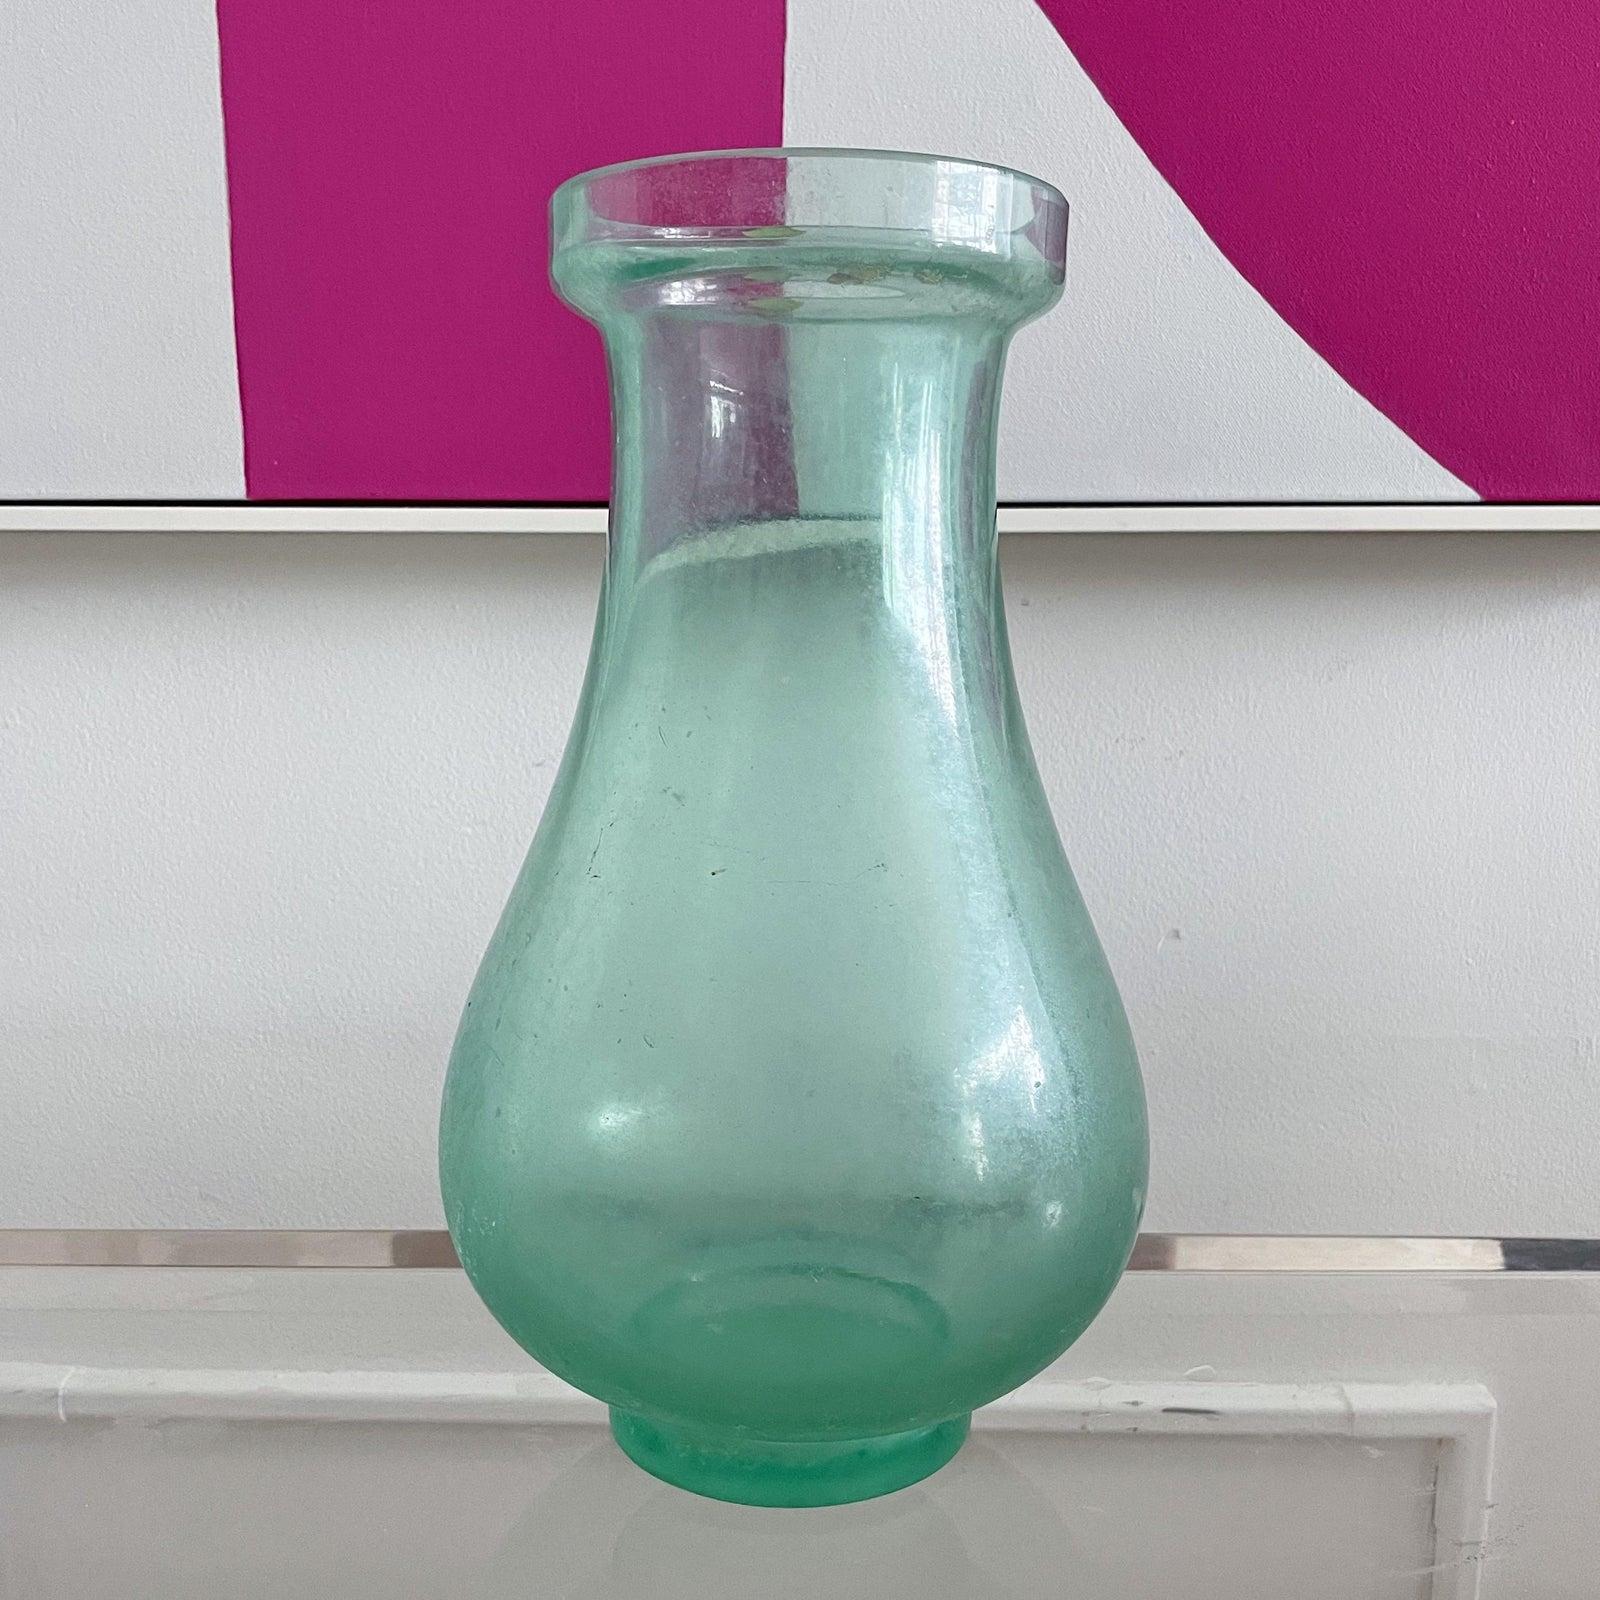 Bulbous Seguso vase in the scavo technique rendered in a subtile shade of green. Intact label dating the piece 1960-1970.